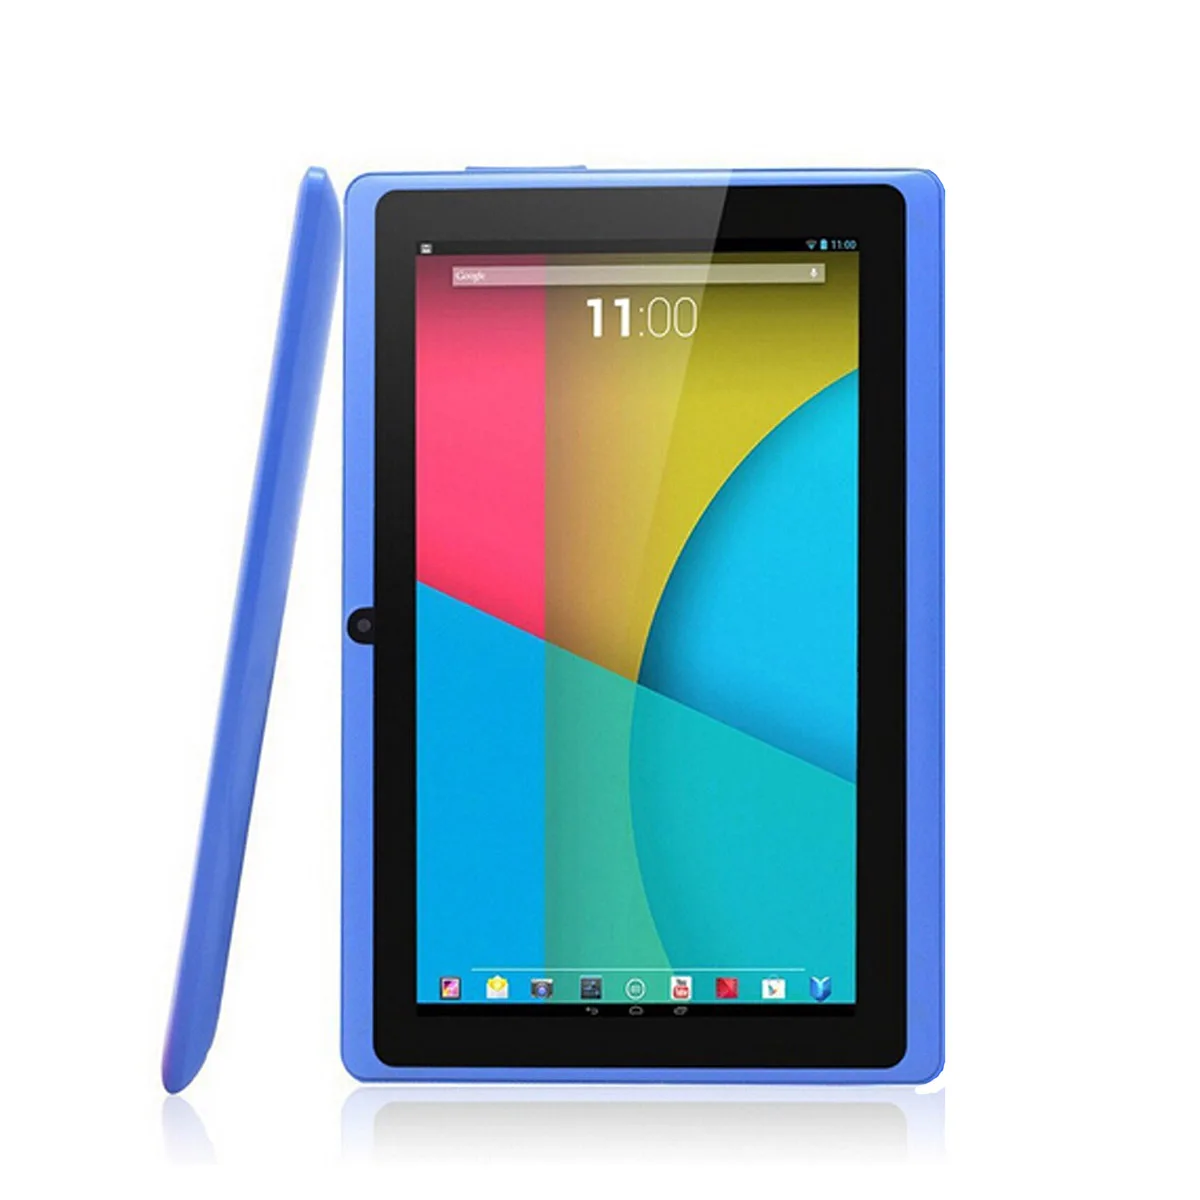 

Q88 7 Inch Tablet PC 512MB RAM 4GB ROM A33 Quad Core Allwinner Android 4.4 KitKat Capacitive 1.5GHz WIFI Dual Camera Flashlight